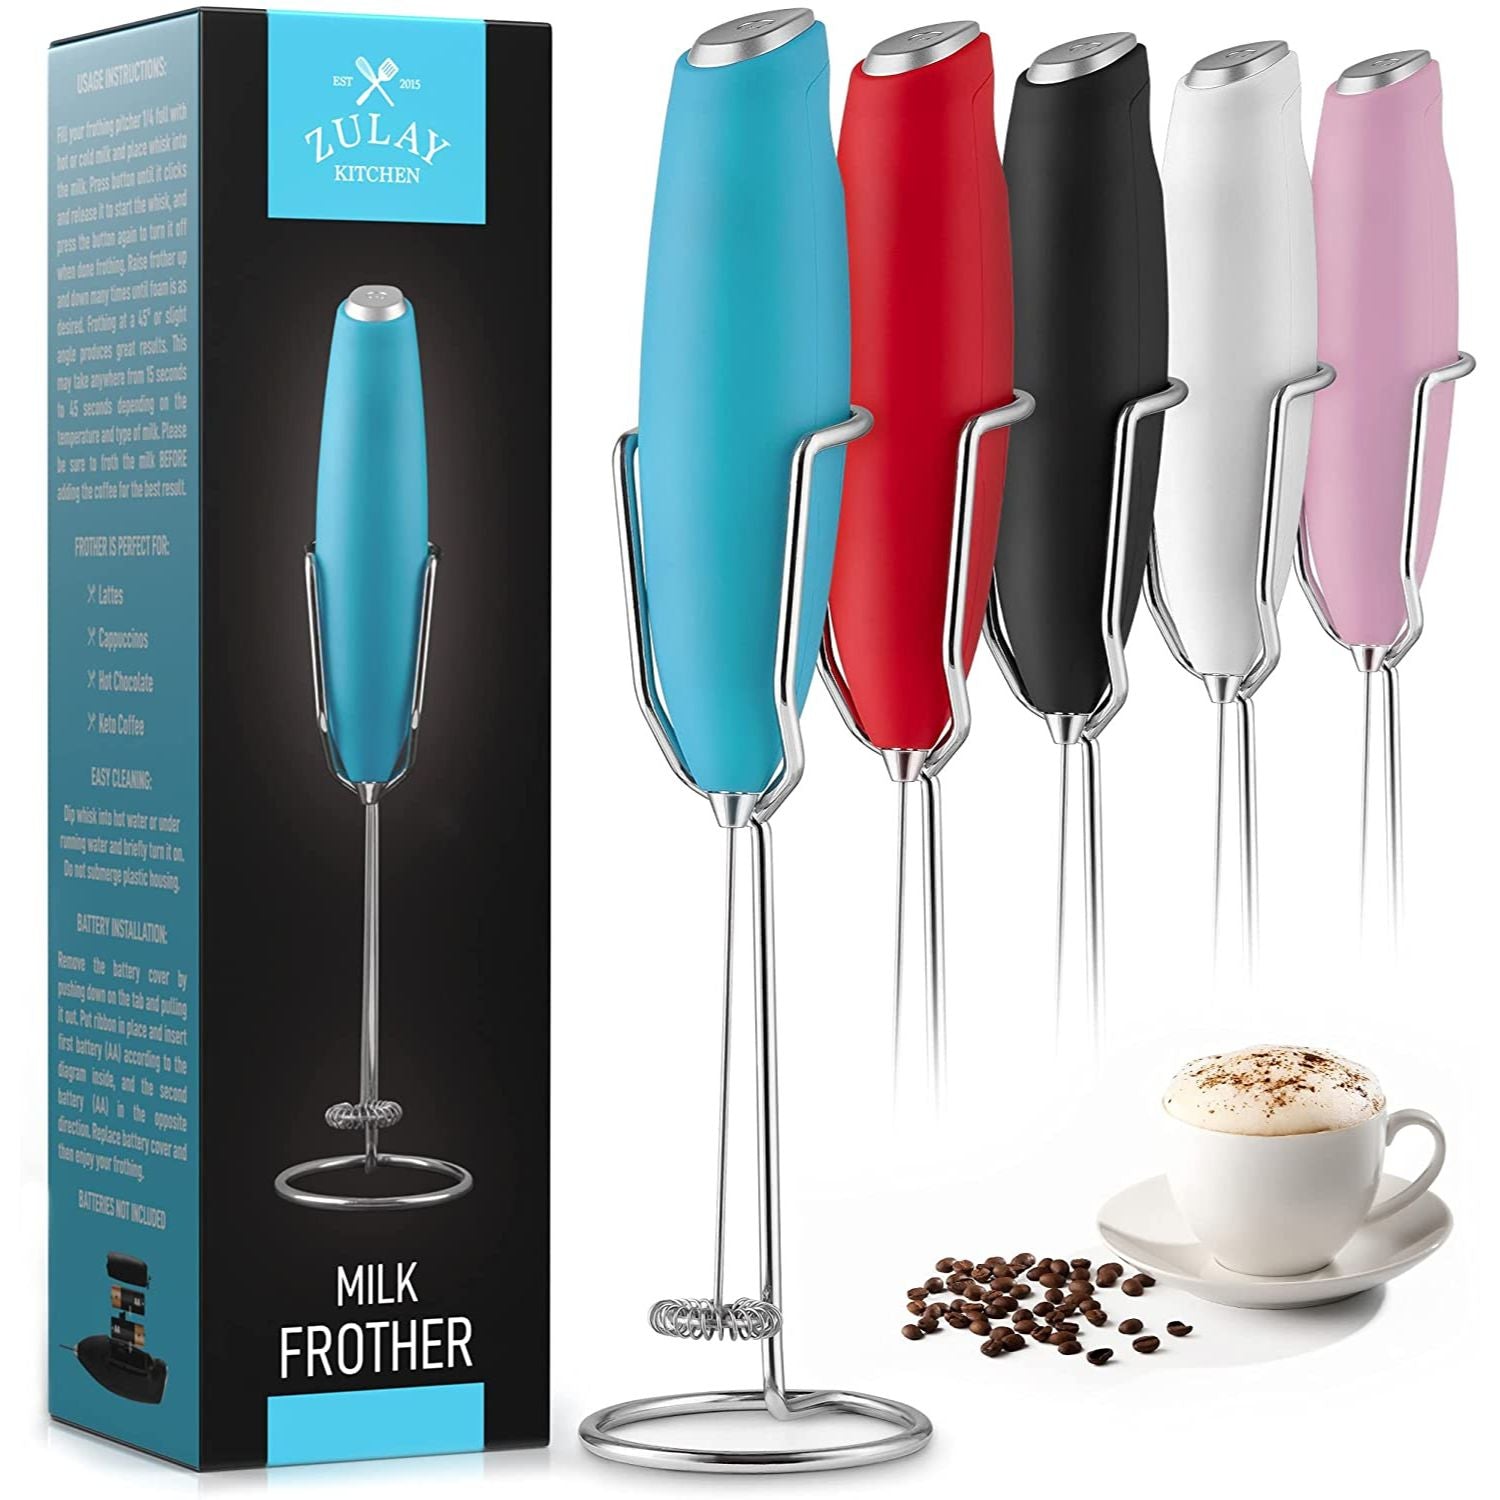 Zulay Kitchen Milk Frother With Holster Stand - Walnut, 1 - Kroger